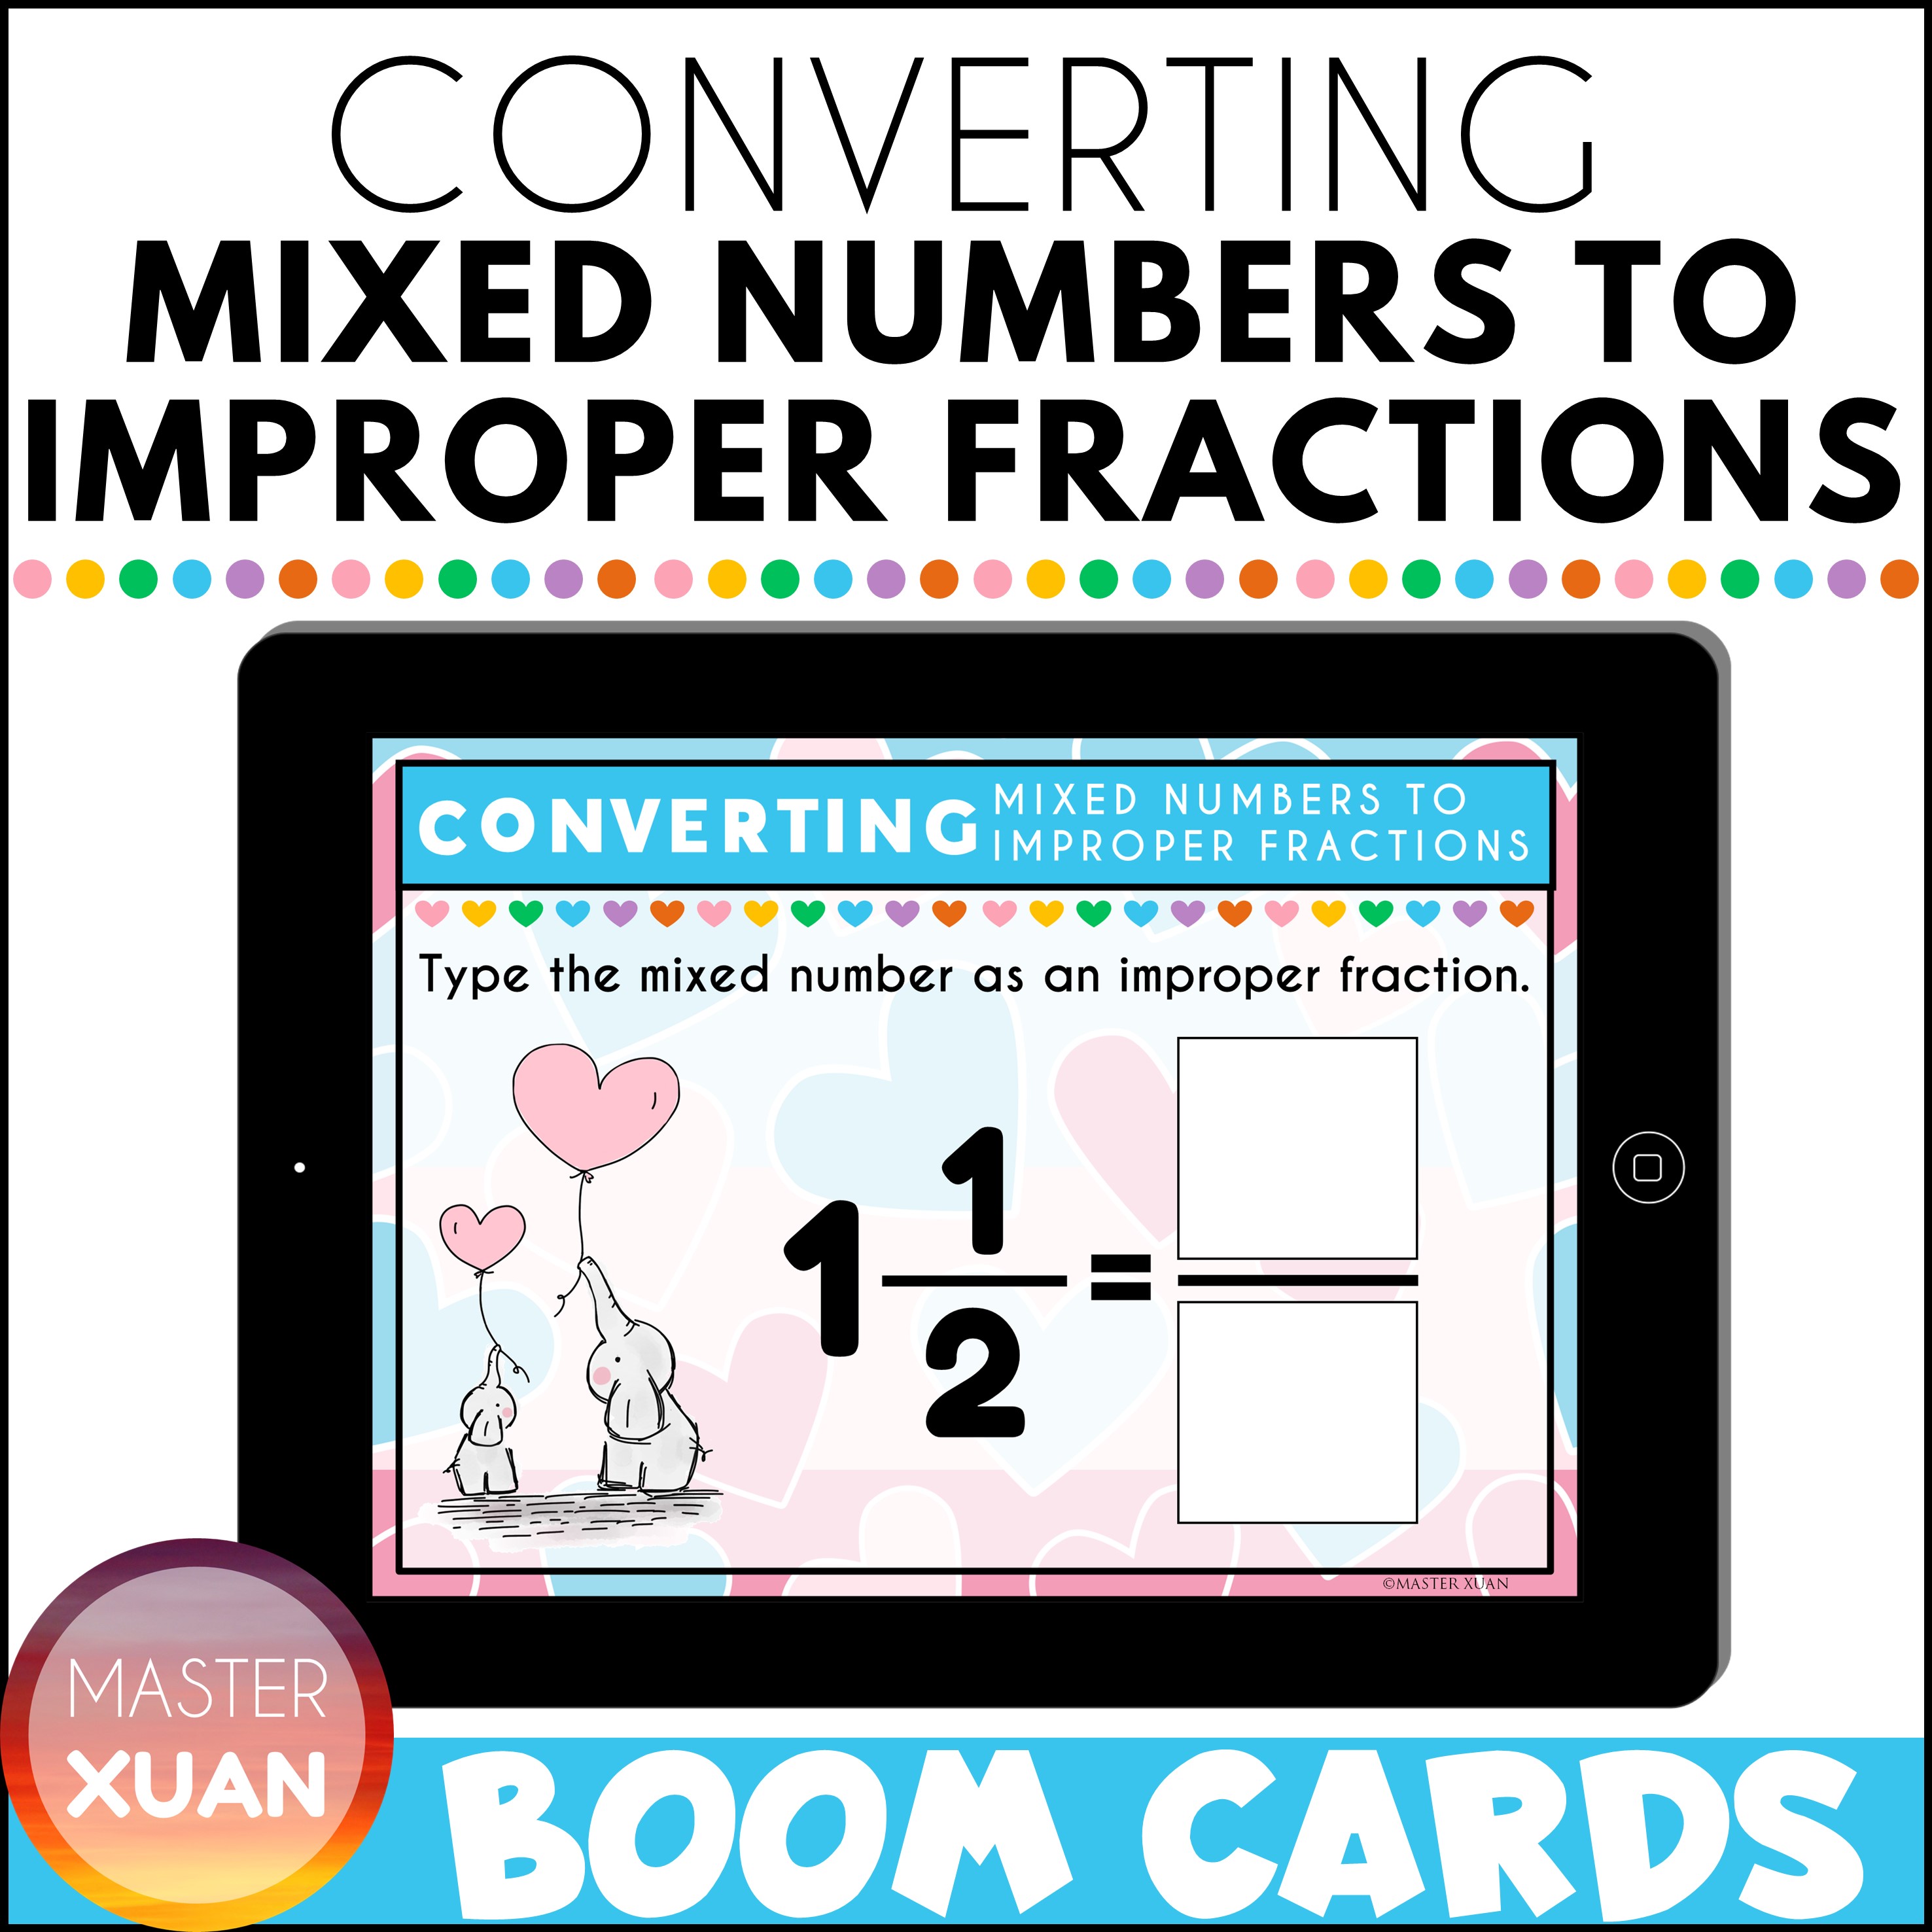 convert mixed numbers into improper fractions cover